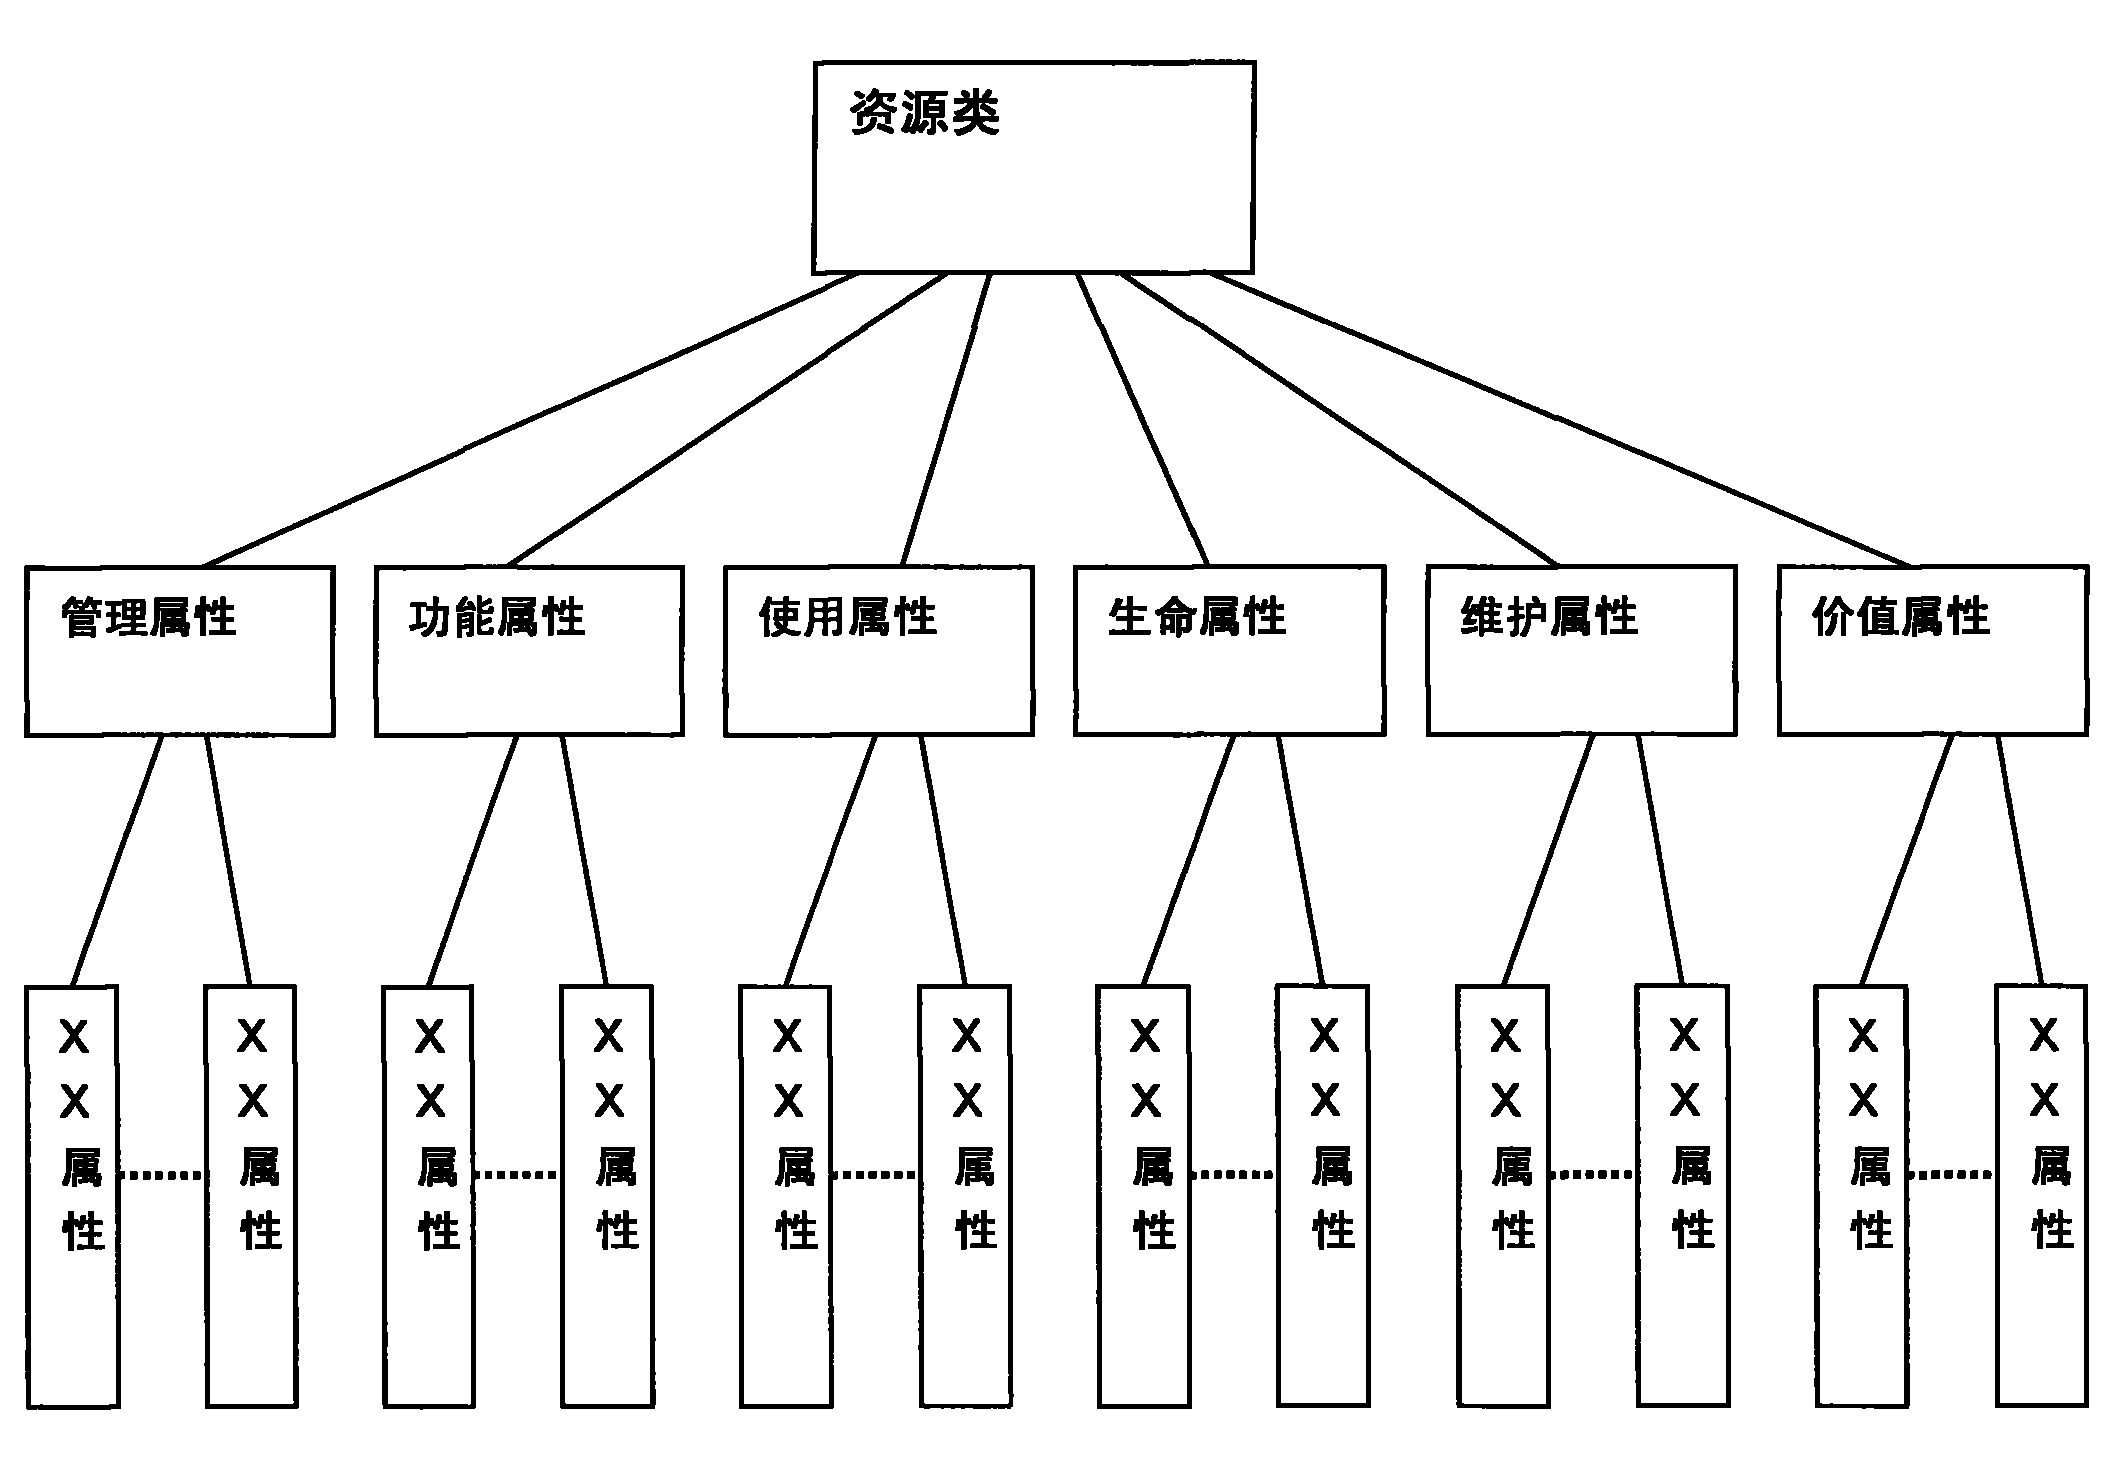 Uniform resource model of full service converged network